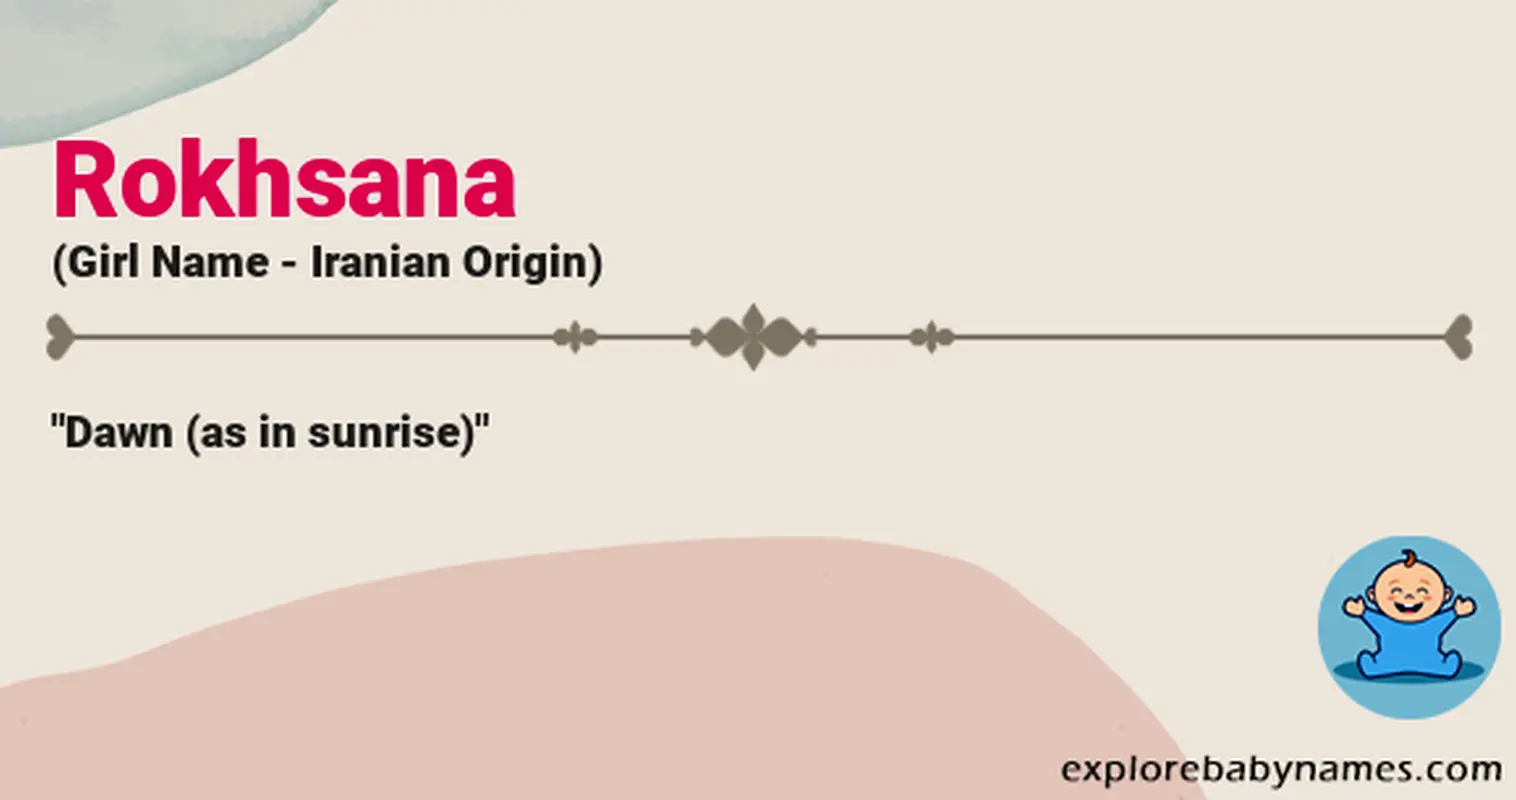 Meaning of Rokhsana